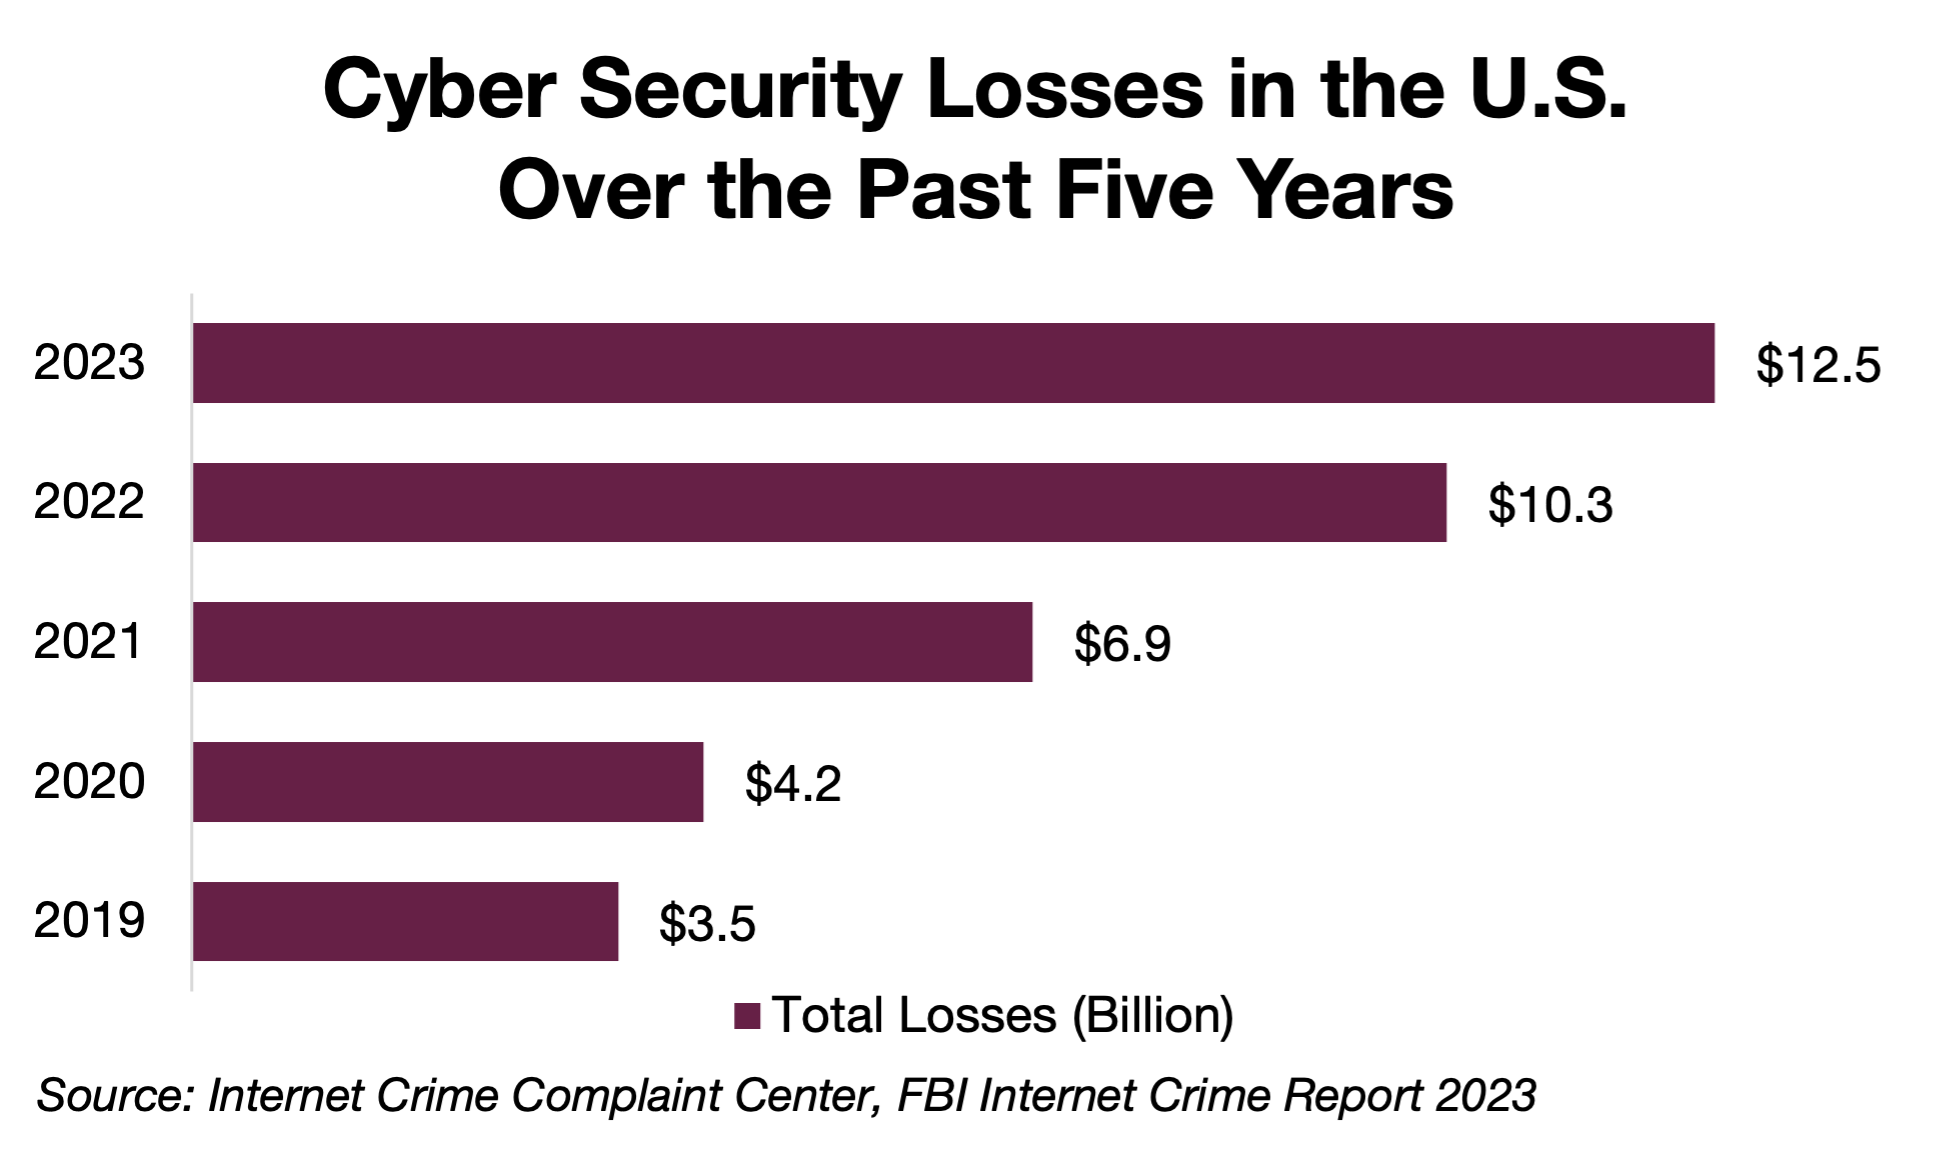 Chart showing exponential increase in cyber security losses in the U.S. over the past five years, beginning in 2019